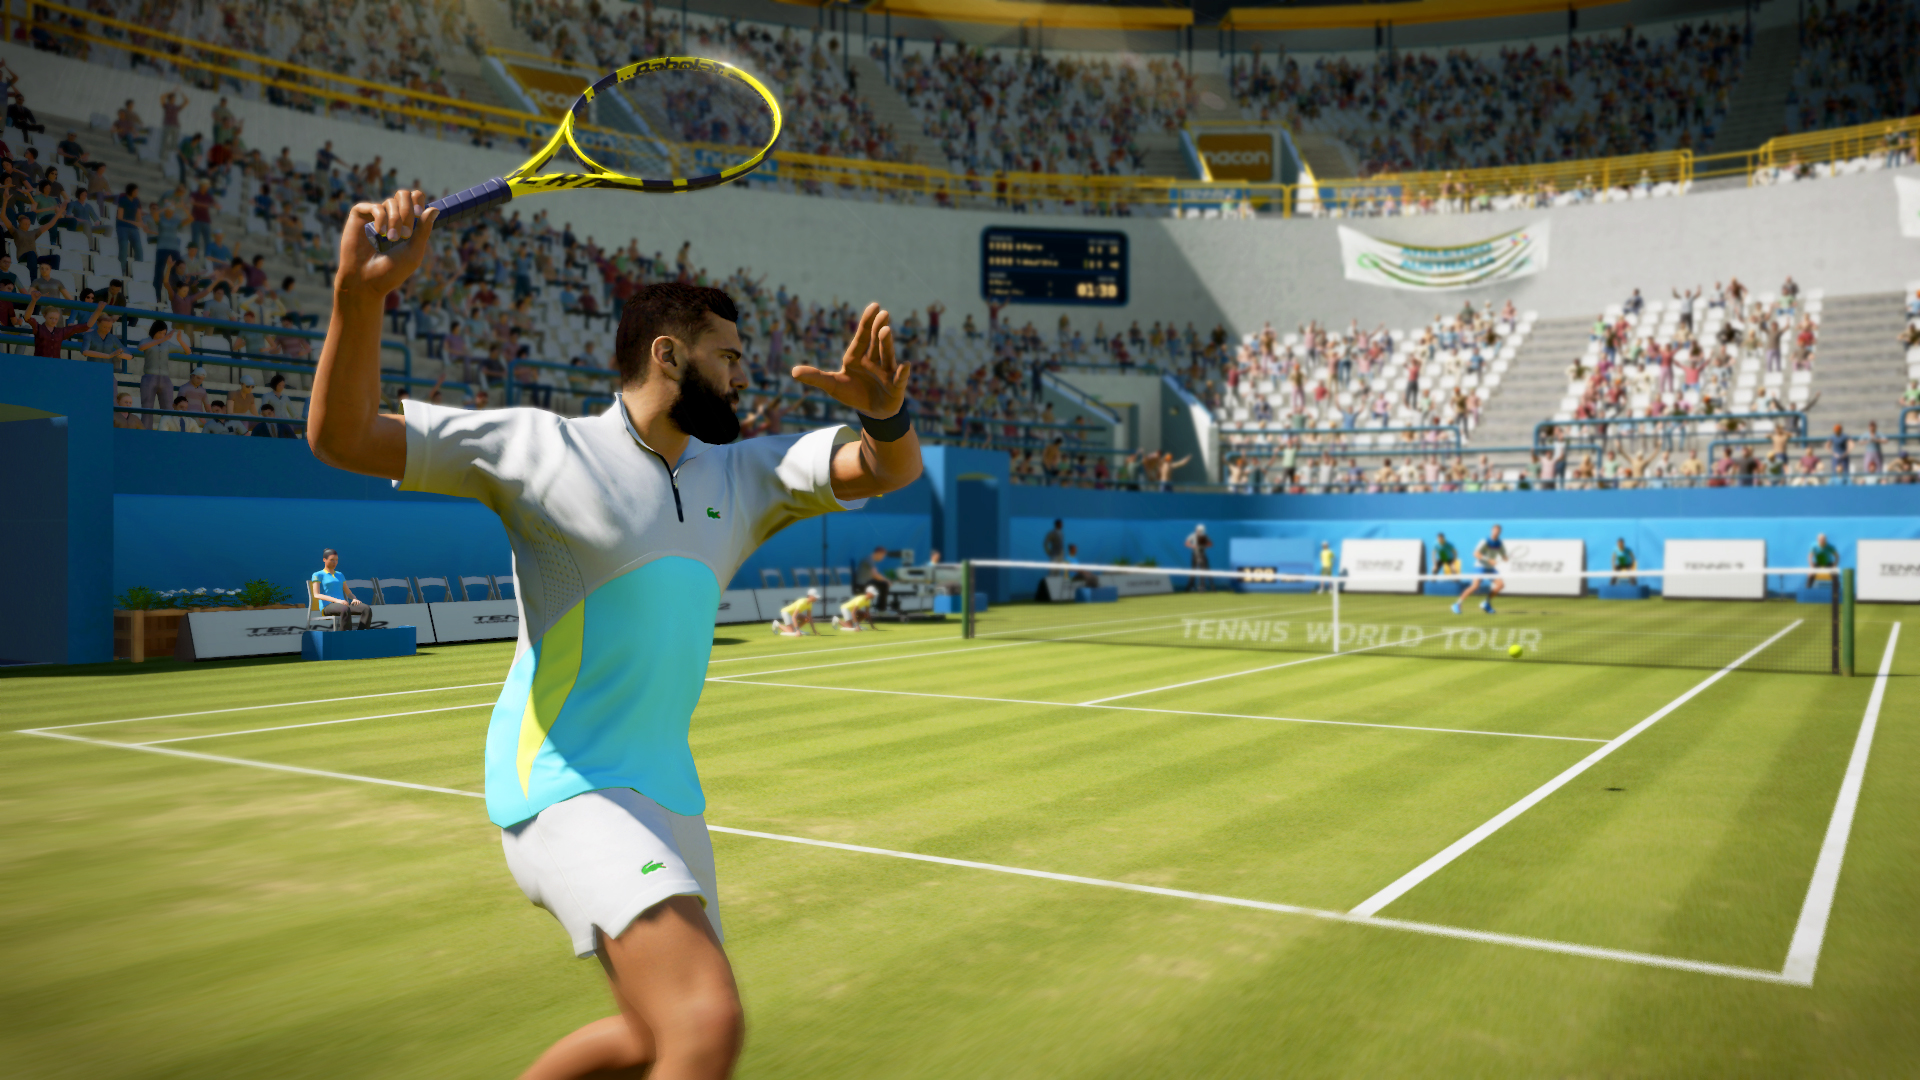 Tennis World Tour 2 Roster Announced, Features Federer and Nadal | Den